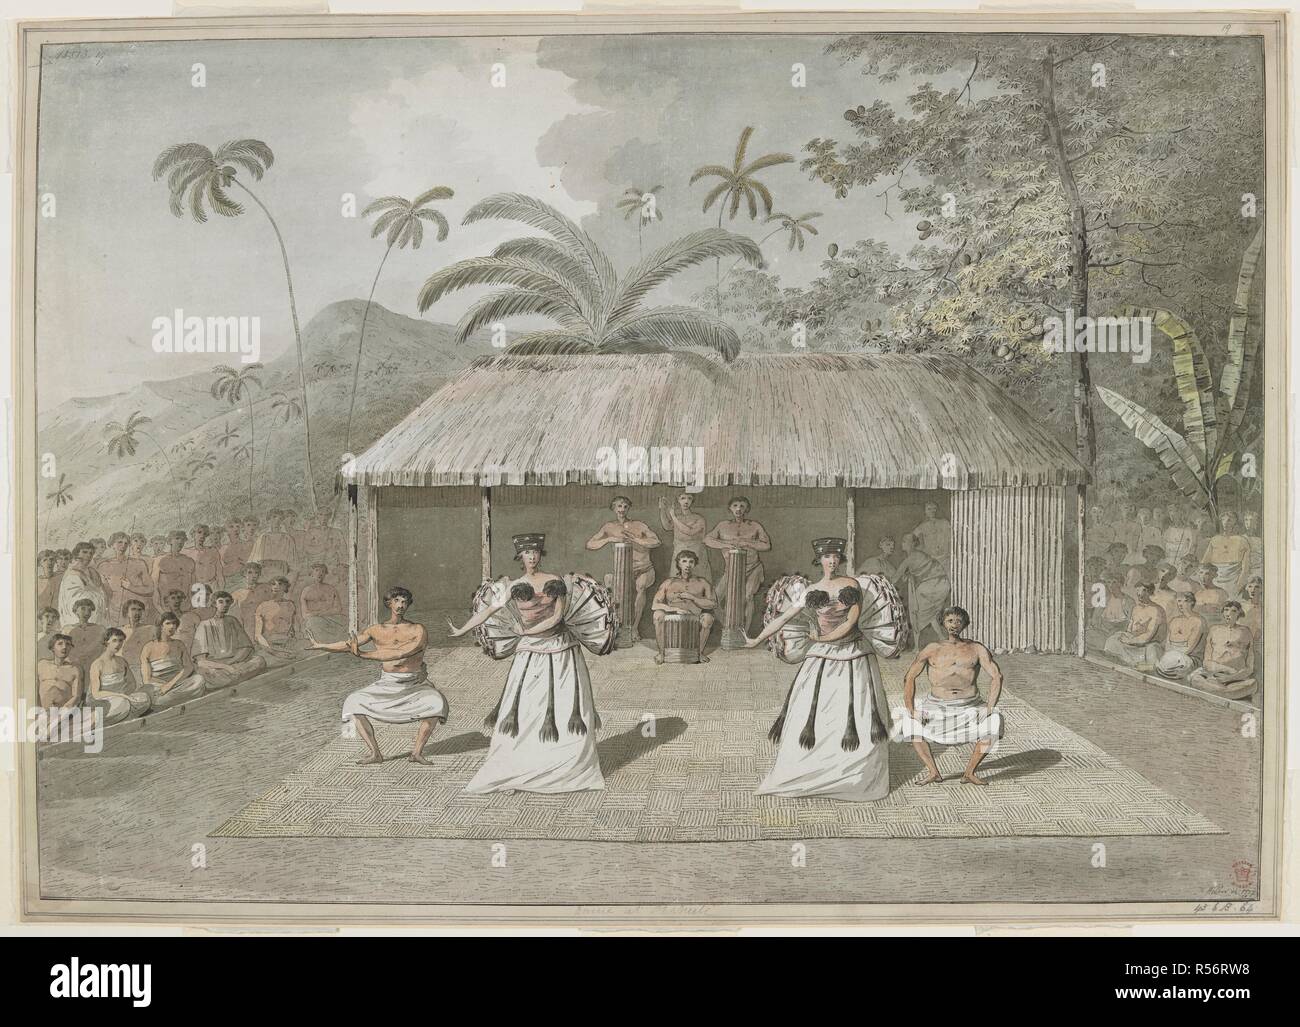 [Whole drawing] A dance or heiva at Otaheite [Tahiti].Two men and two women dancing, with drummers behind, and spectators either side. September 1777. Drawings executed by John Webber during the Third Voyage of Captain Cook, 1777-1779. 1777. Source: Add. 15513, No.19. Language: English. Stock Photo